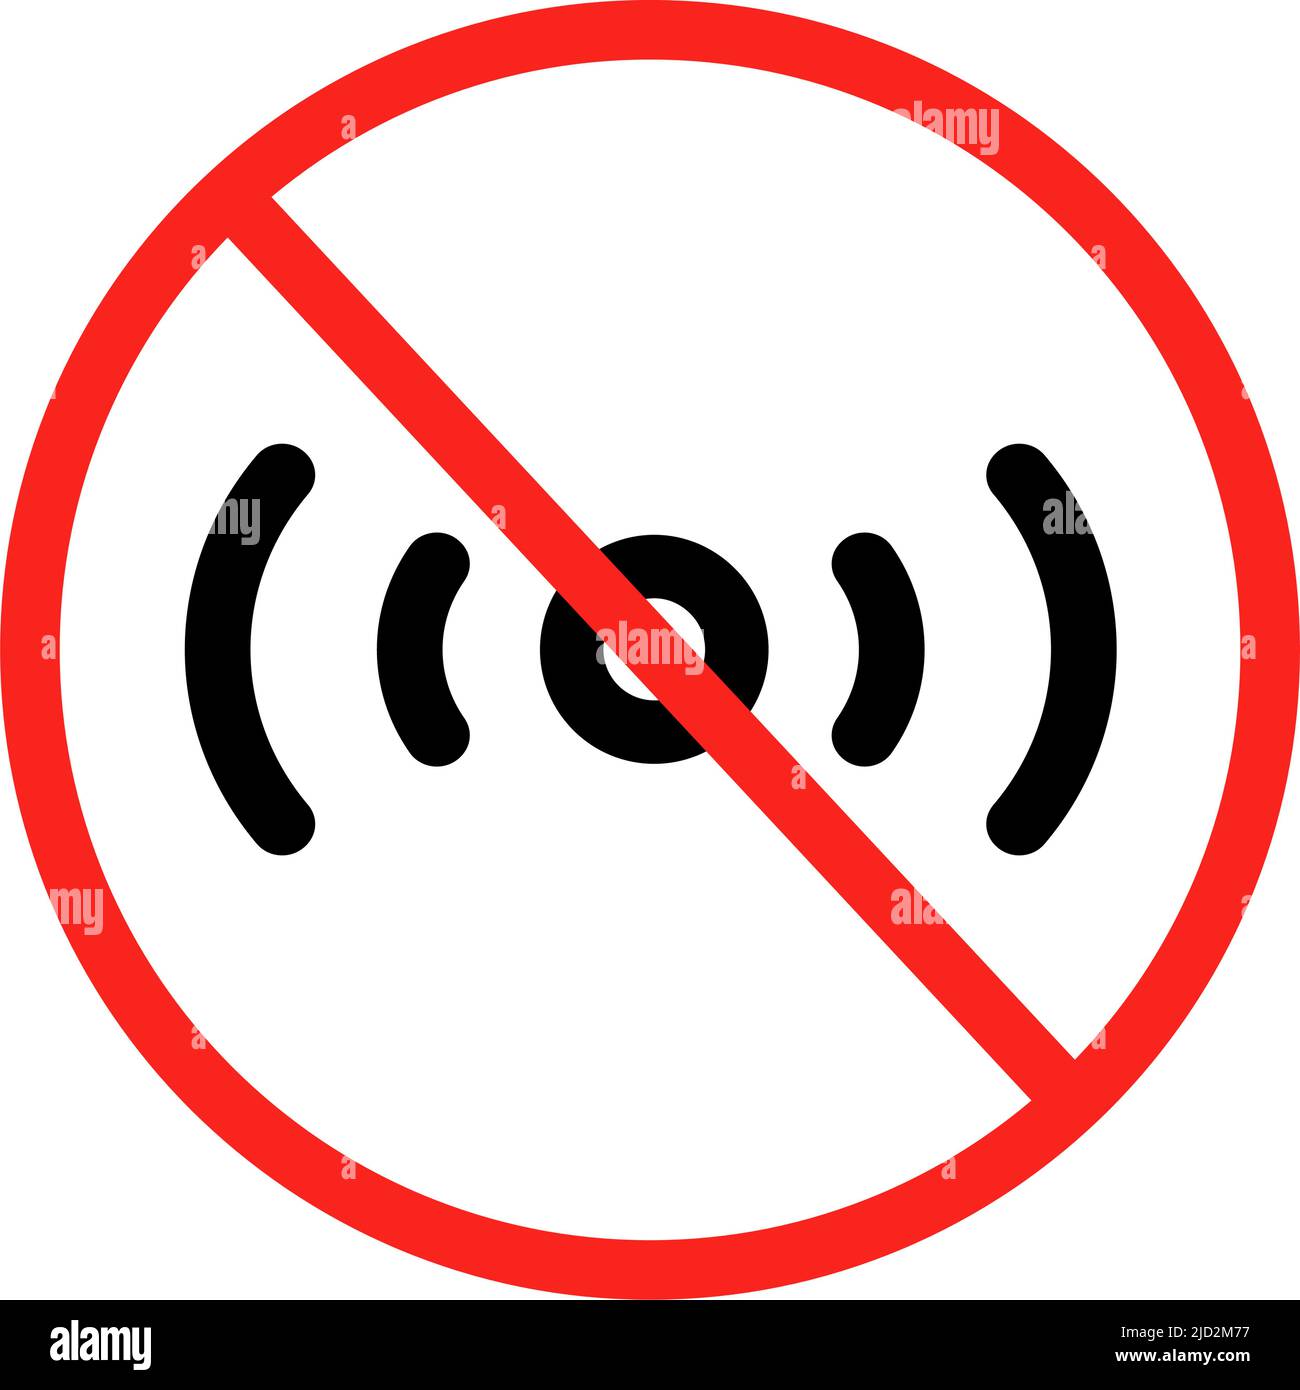 Signs of radio waves and bans. Radio waves are not available. Editable vector. Stock Vector